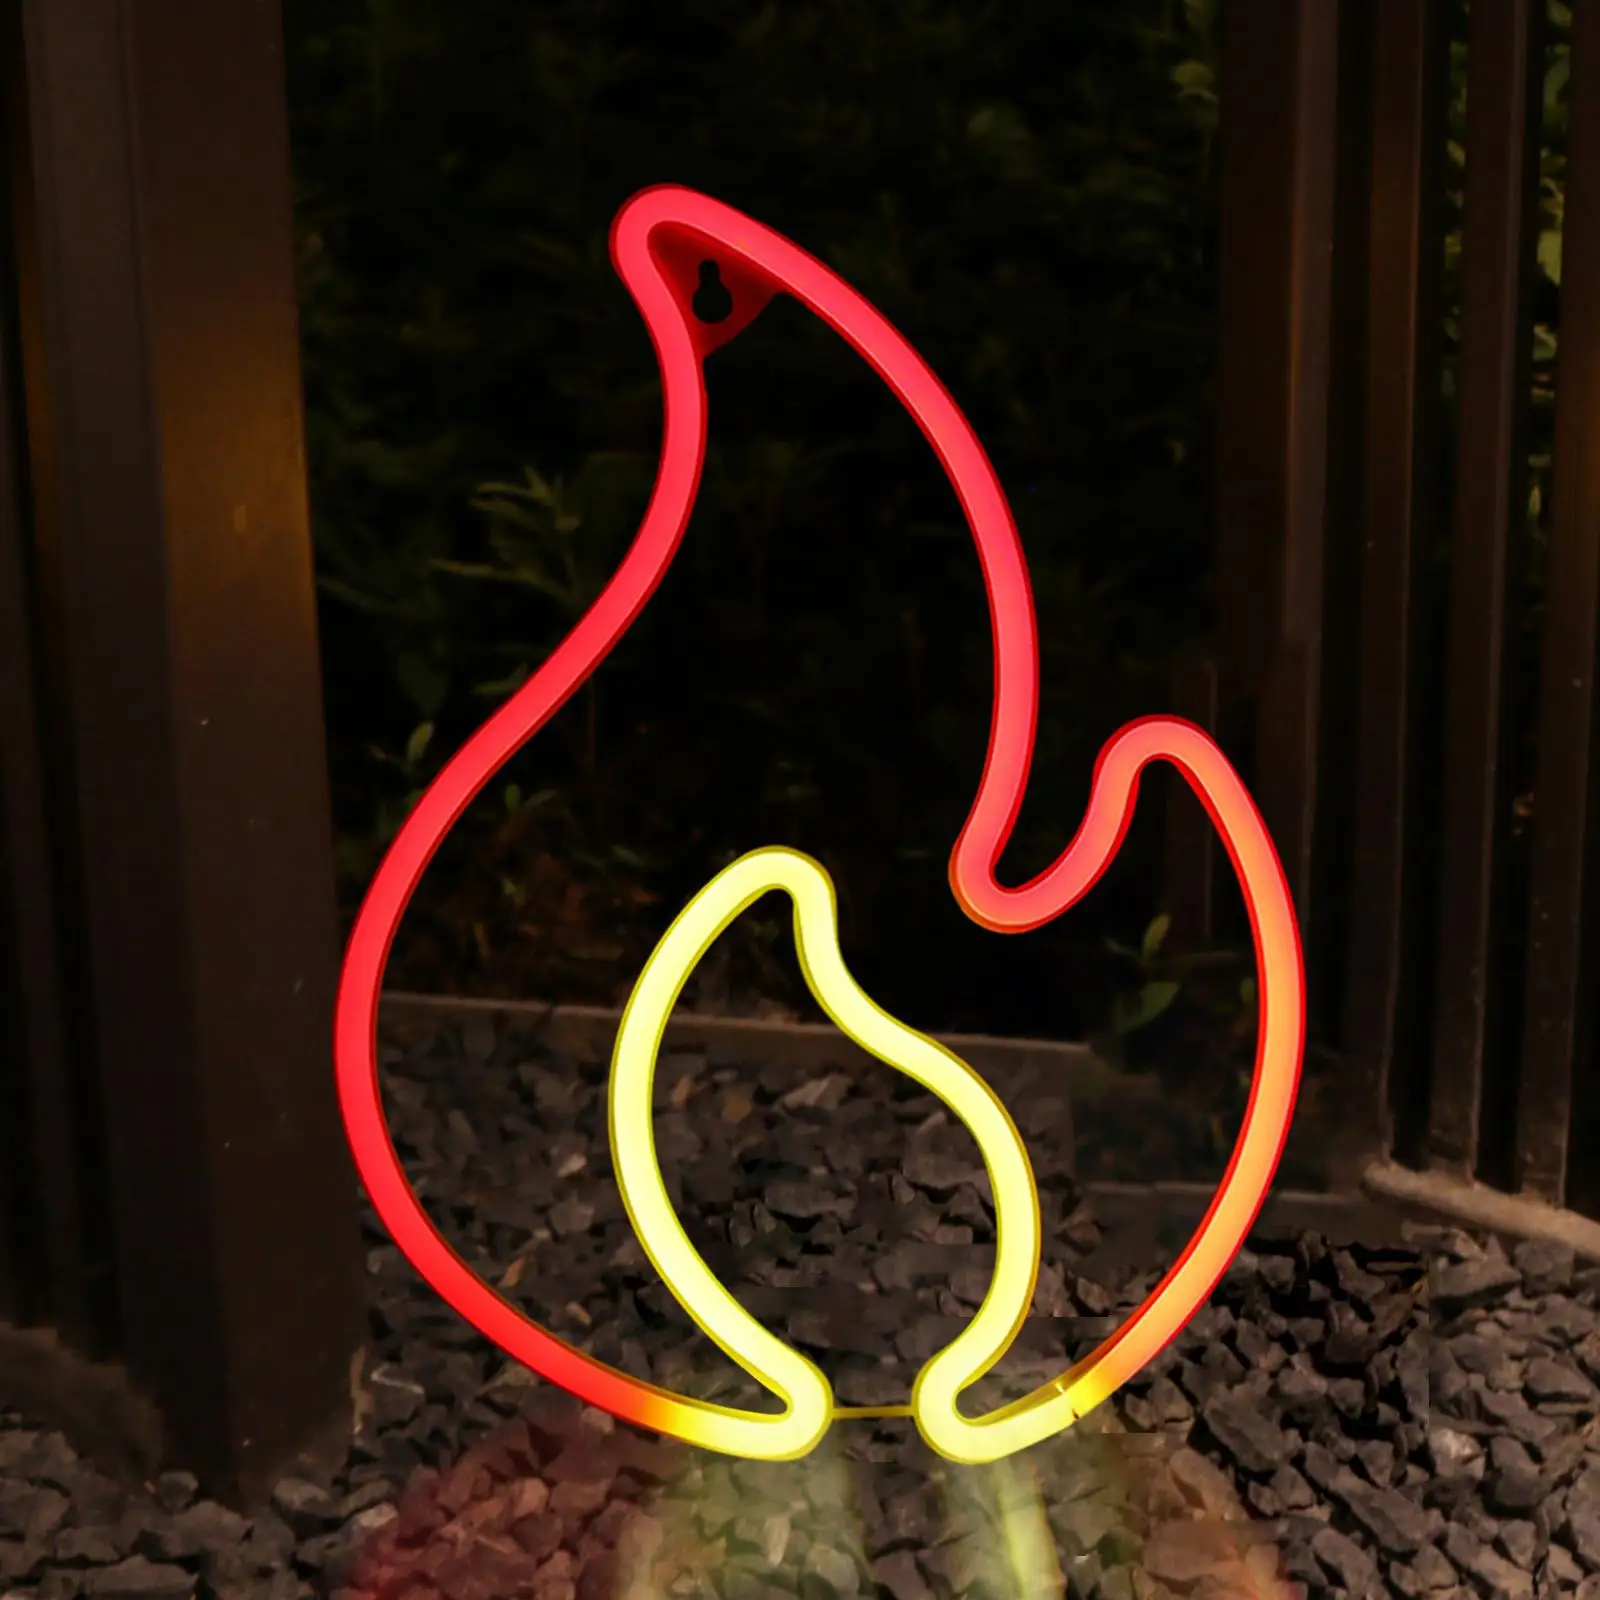 Flame Neon Sign Decor Decorative Neon Light Sign Night Lights Neon Lights for Birthday Party Bar Kids Living Room Home